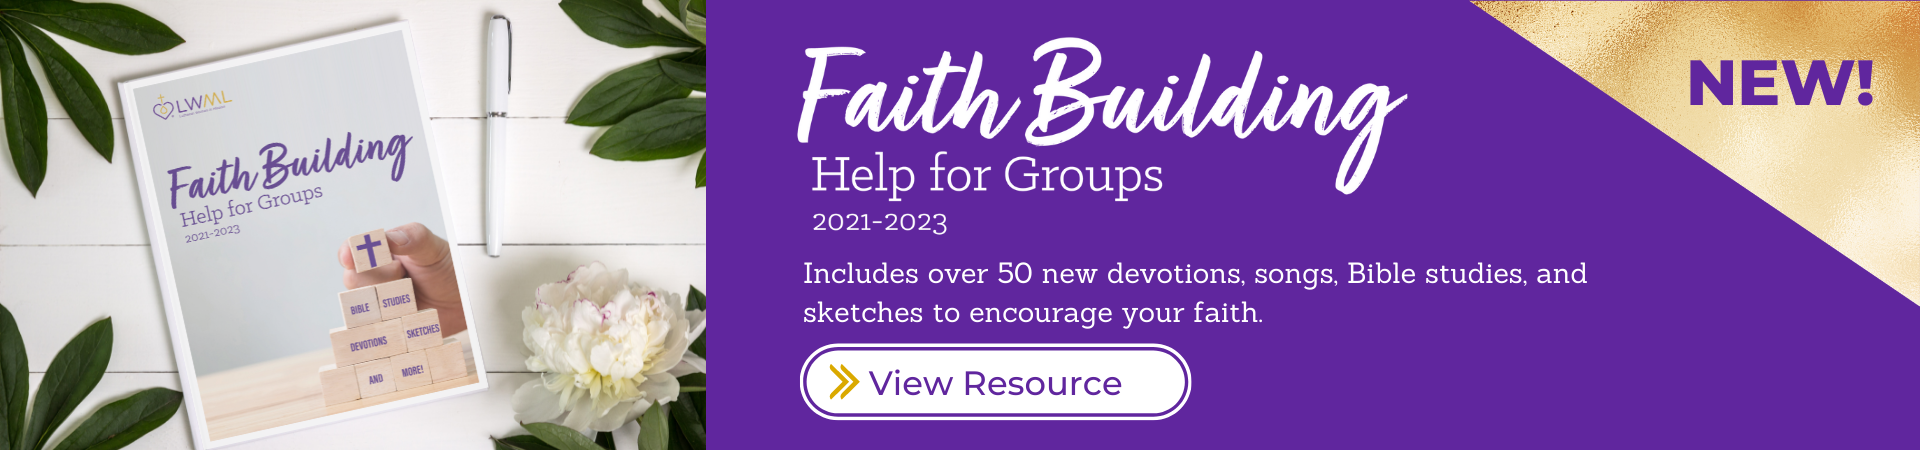 New: Faith Building Help for Groups 2021–2023 planner now available. View Resource.